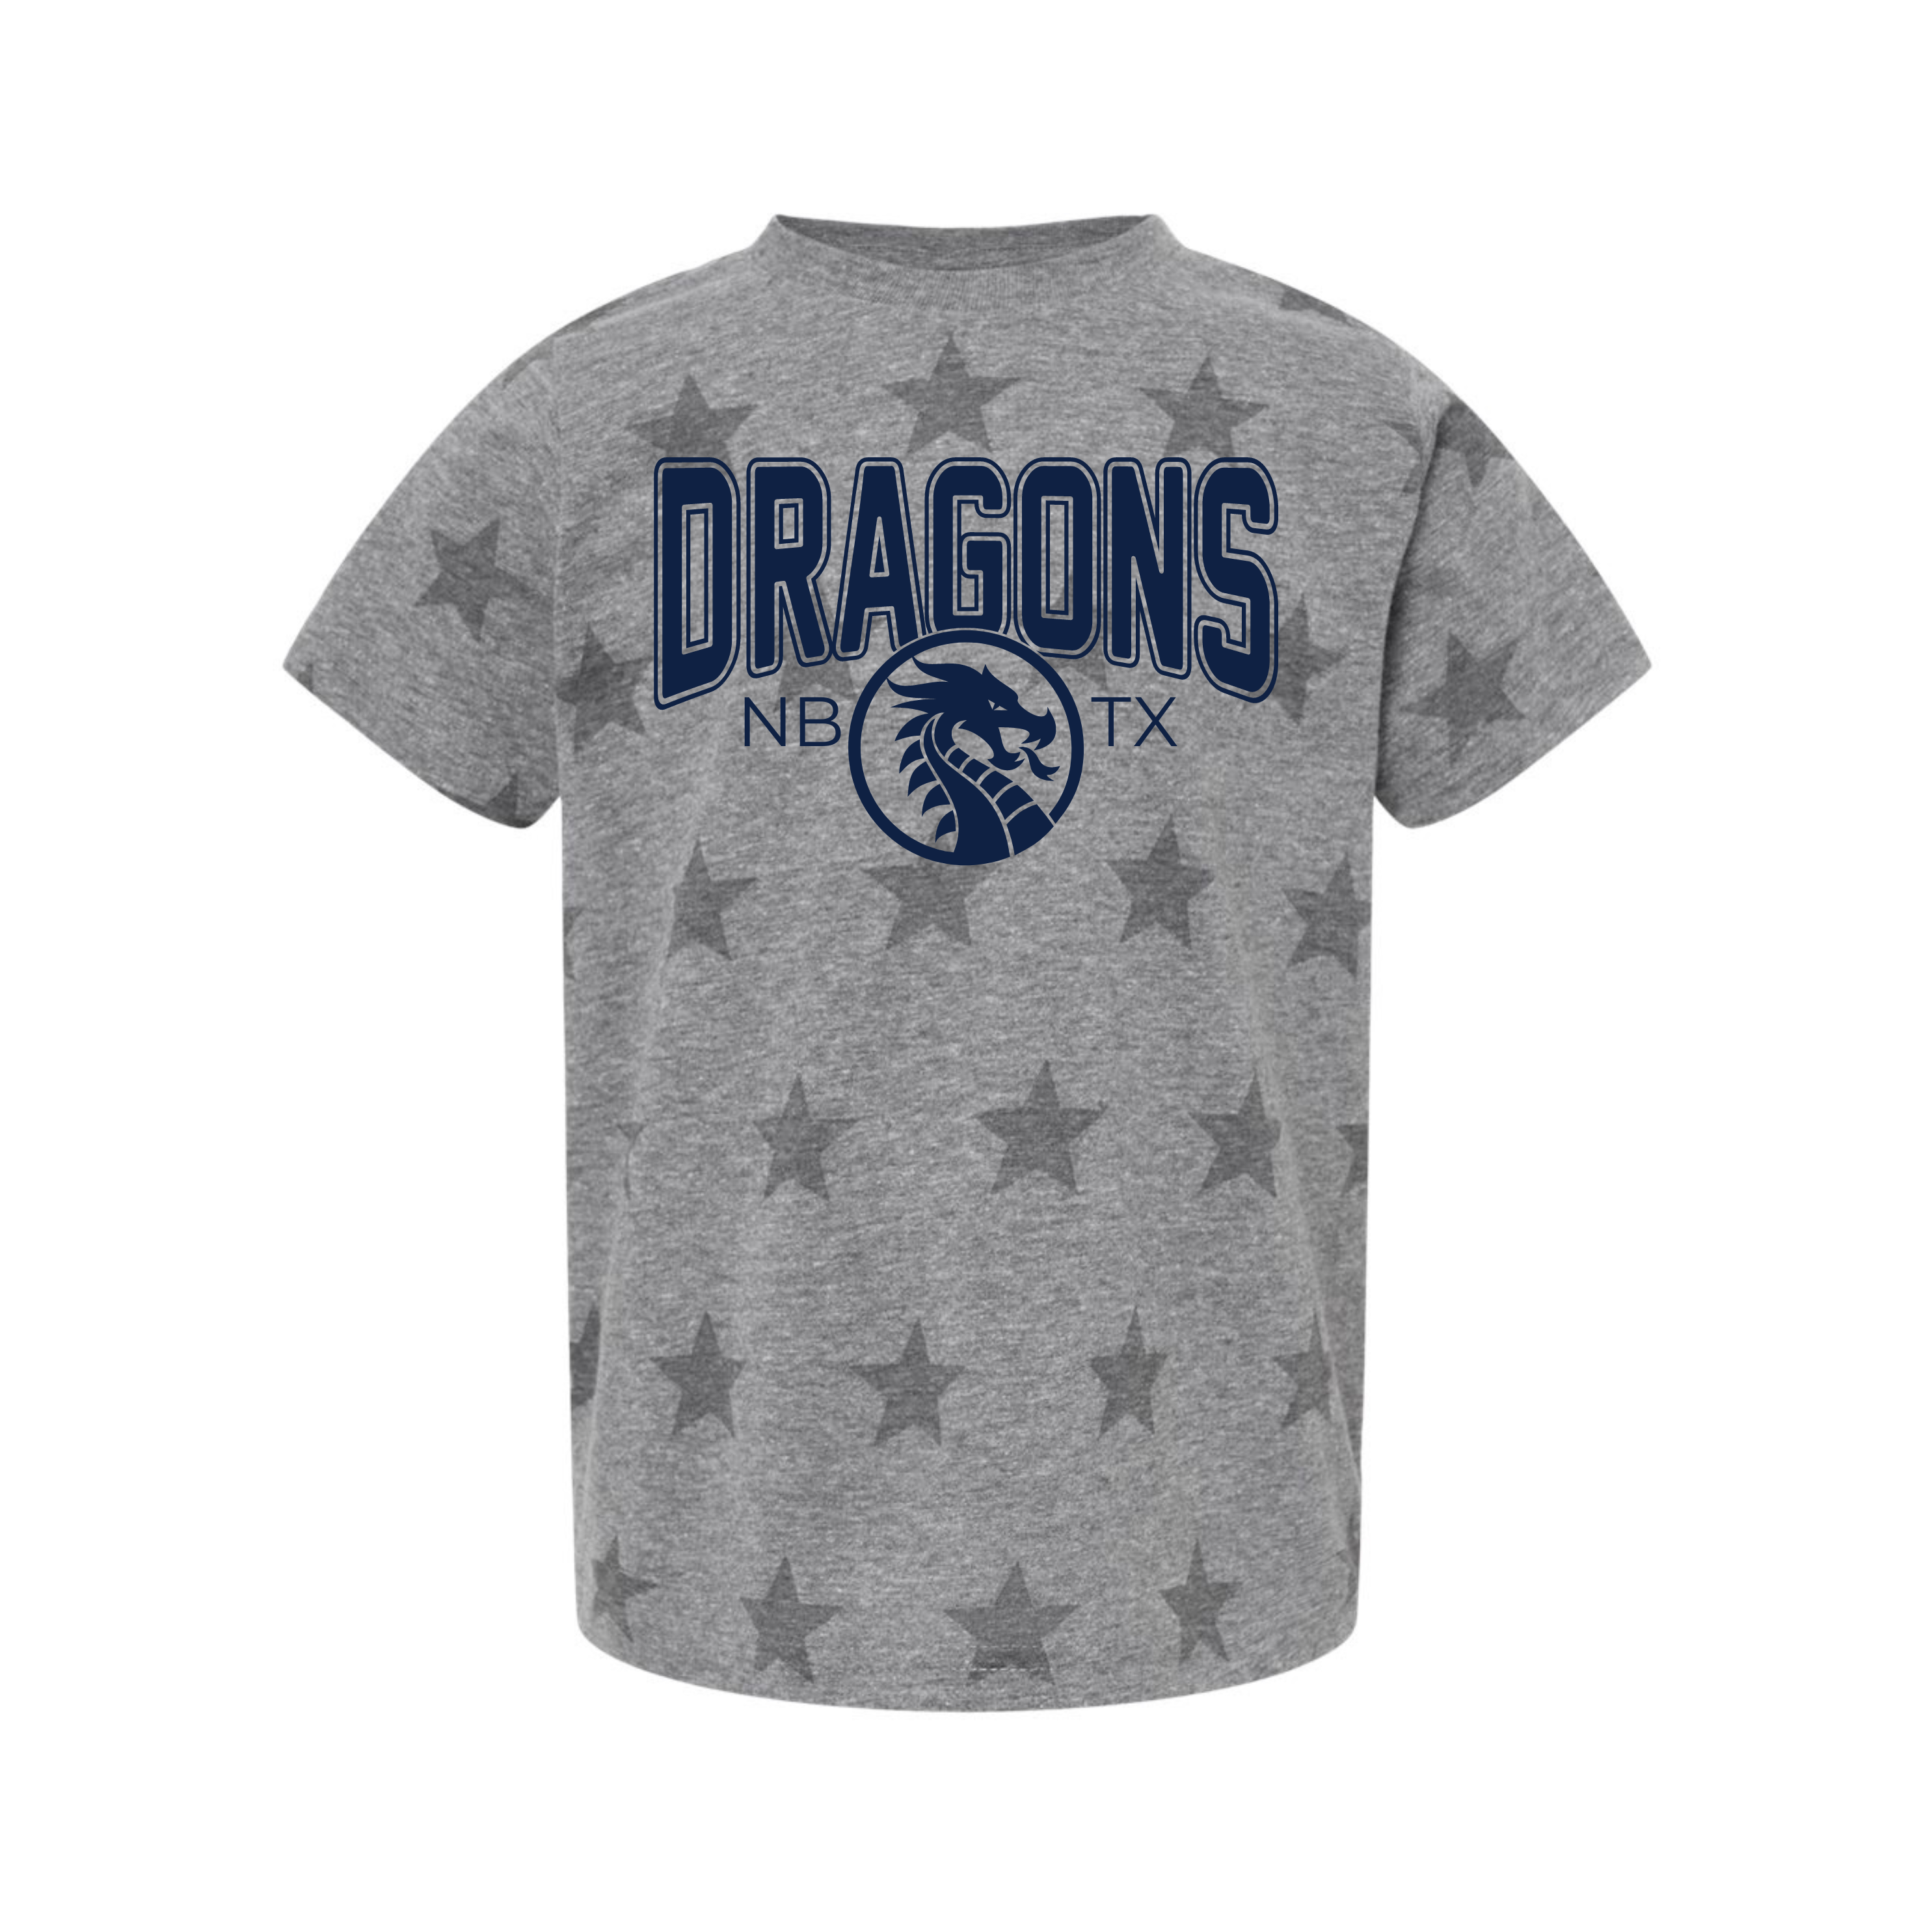 Dragons Over the Stars Toddler Tee